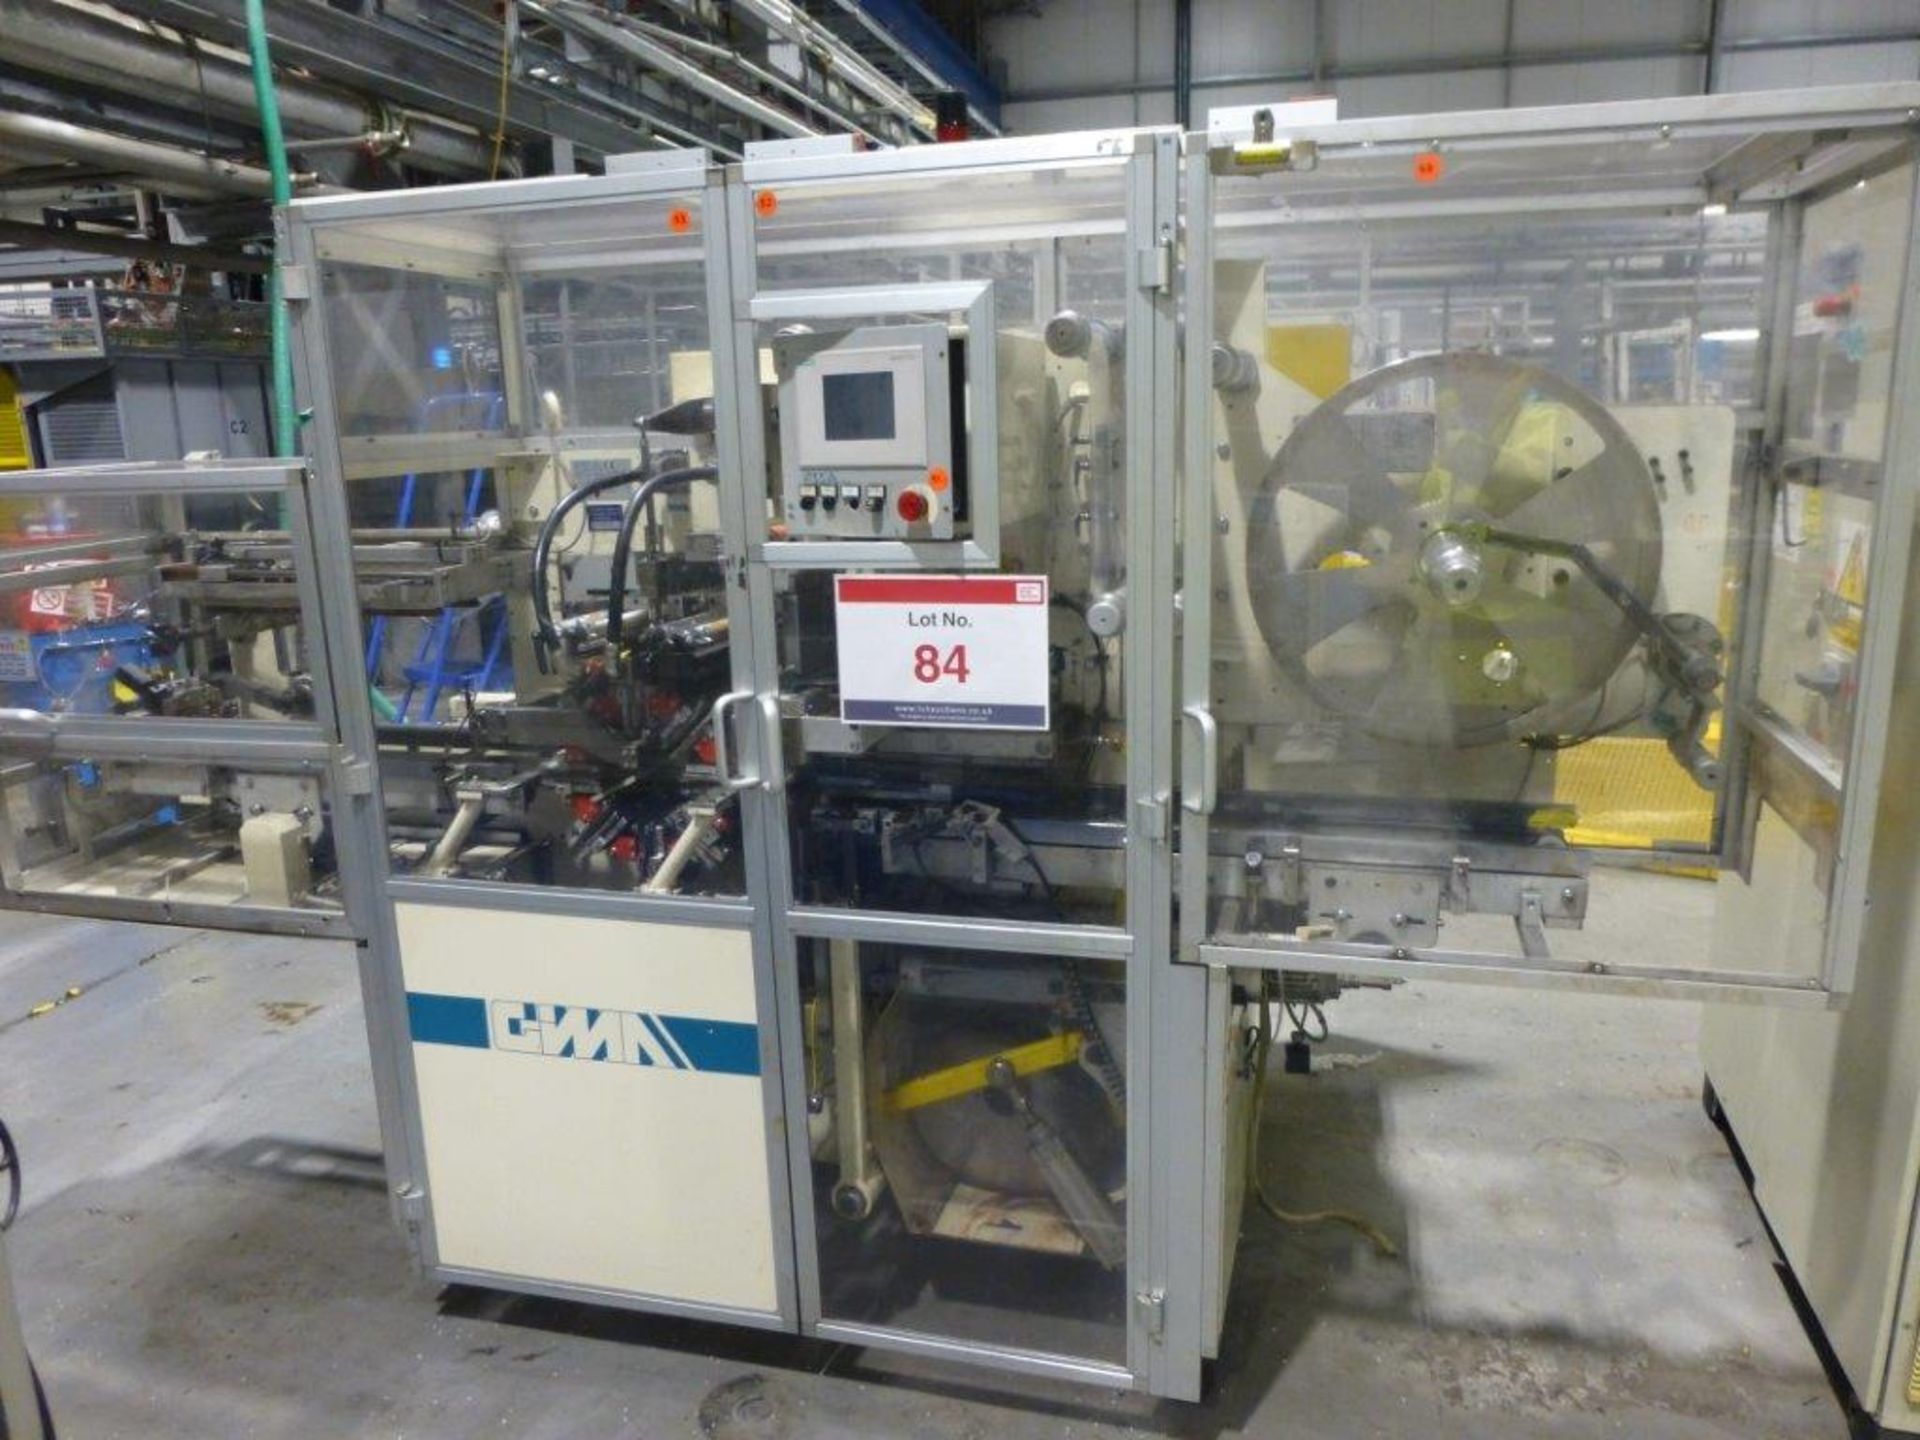 GIMA Type 884 DVD CNC Rotary Thermal Welding Machine Serial No. 88440AO (2002) with flip unit.